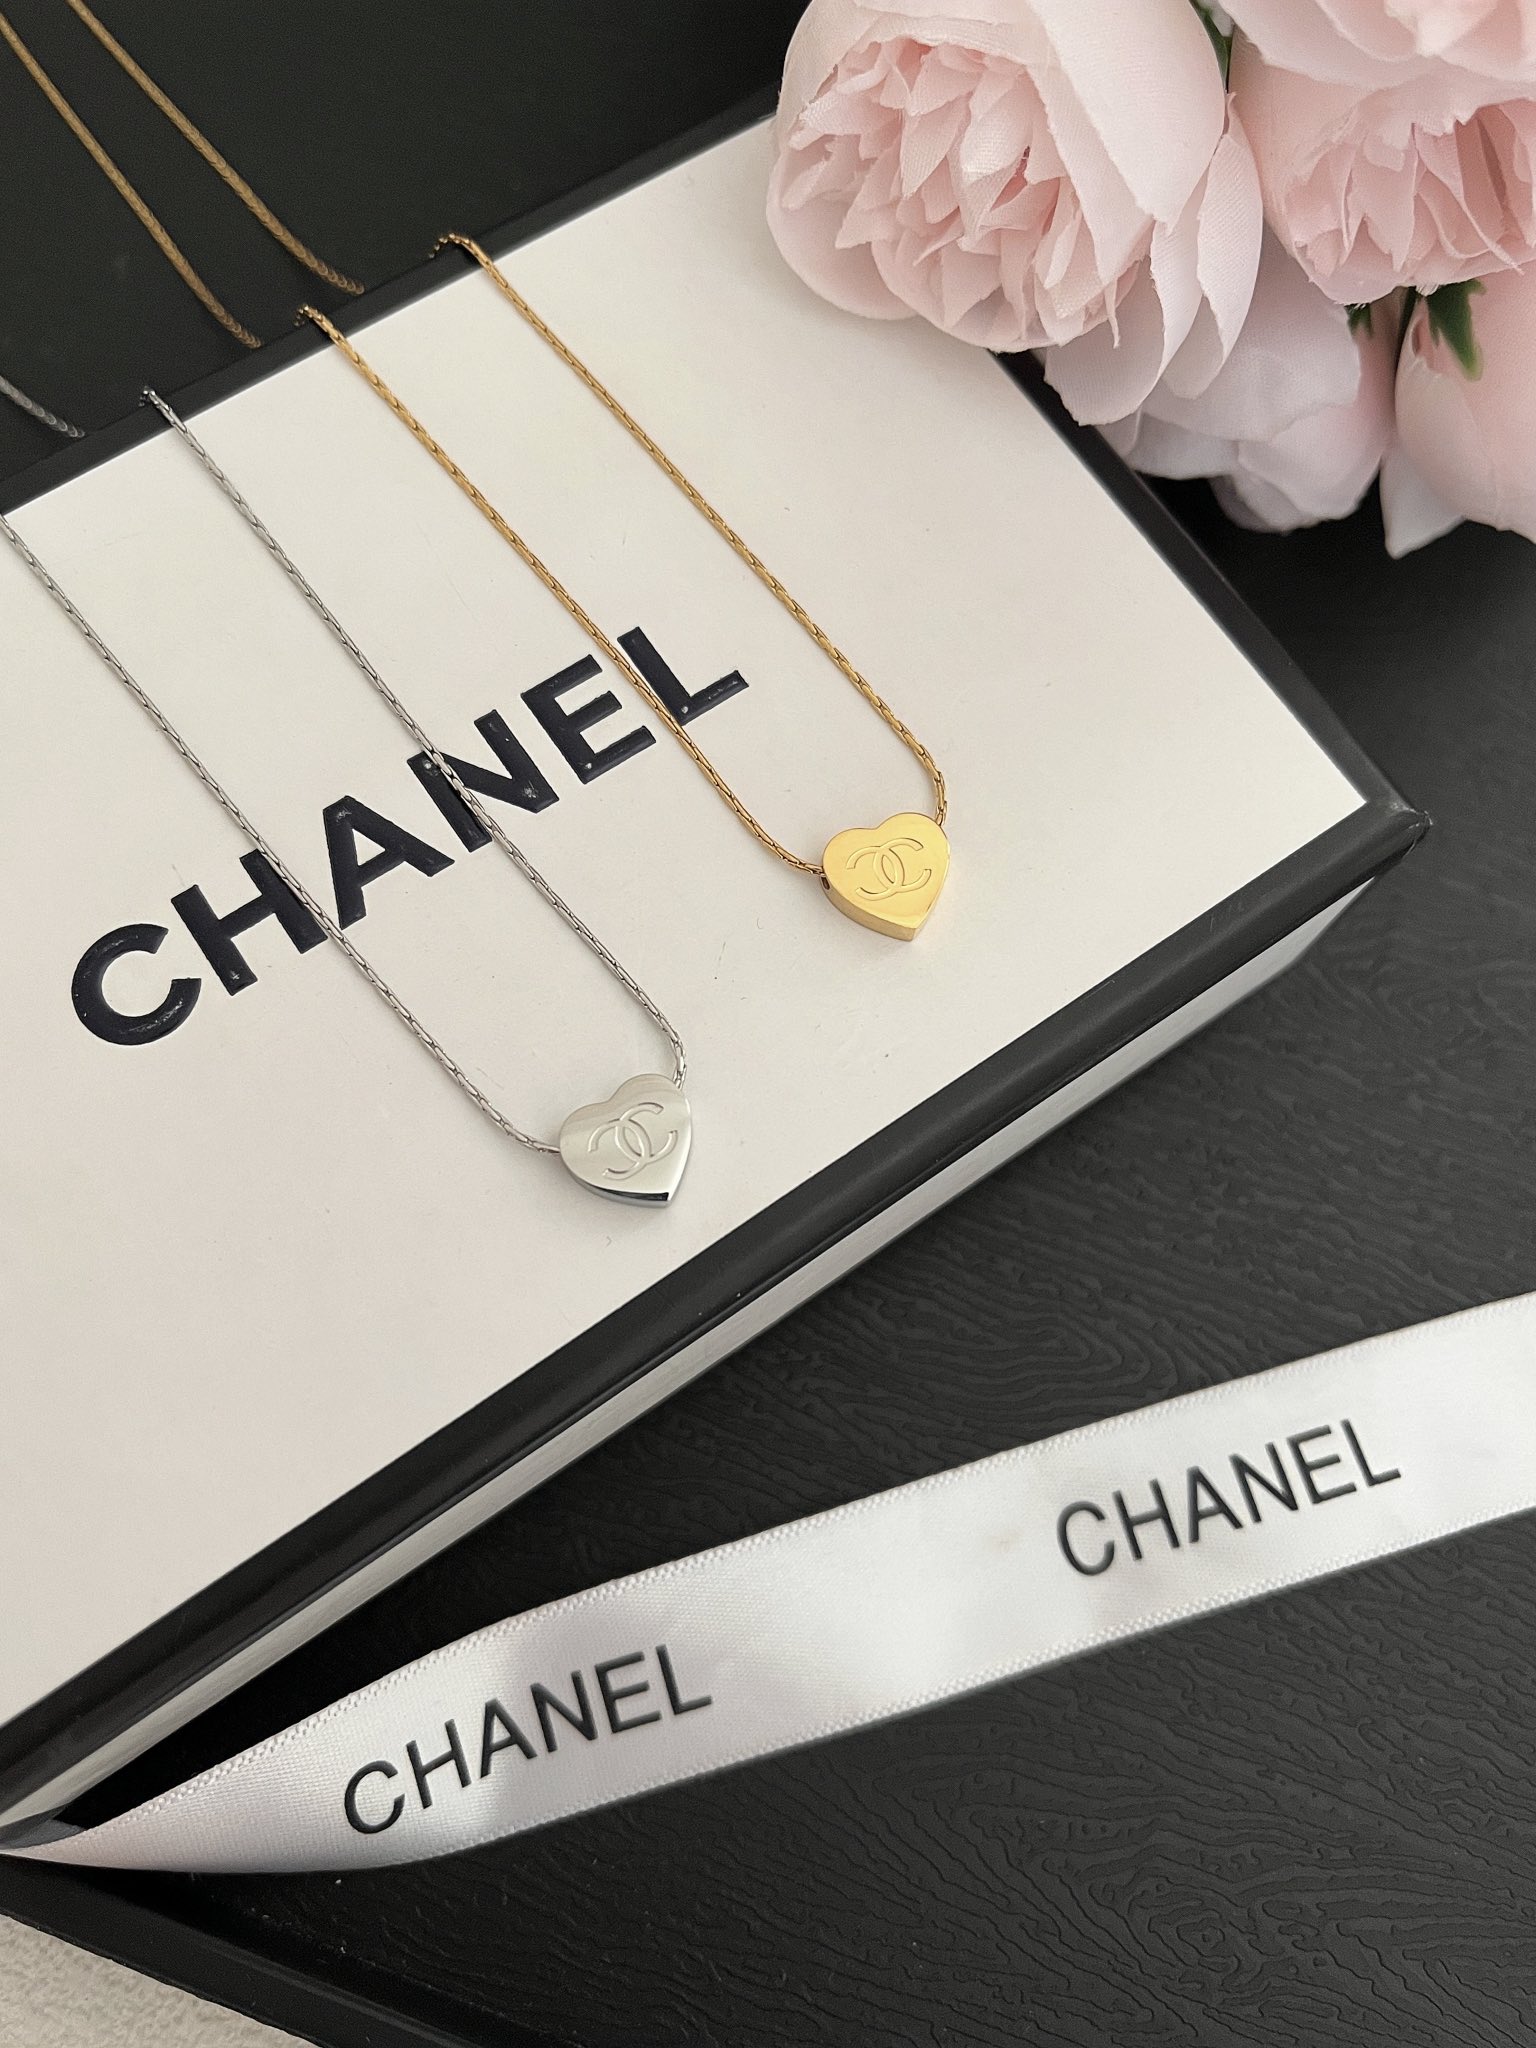 X532  Chanel necklace